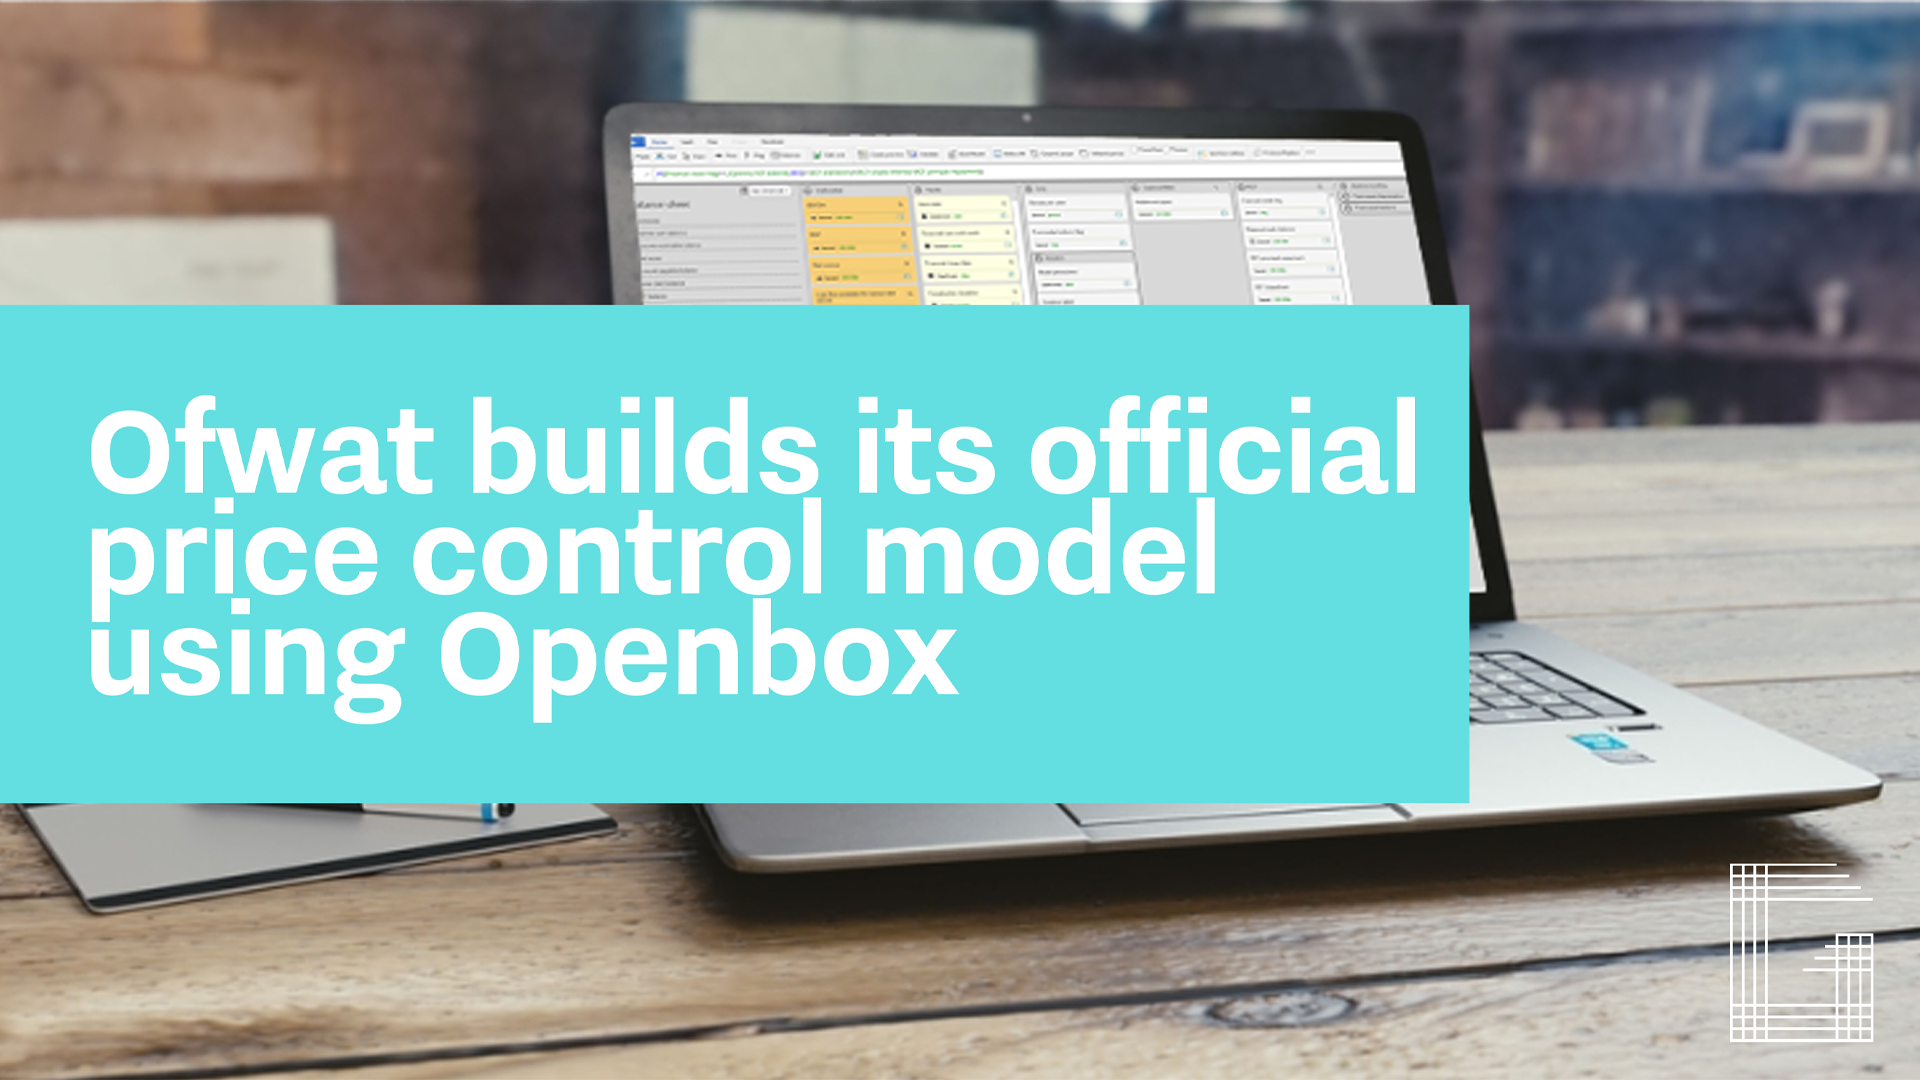 Header Image - Ofwat builds its official price control model using Openbox